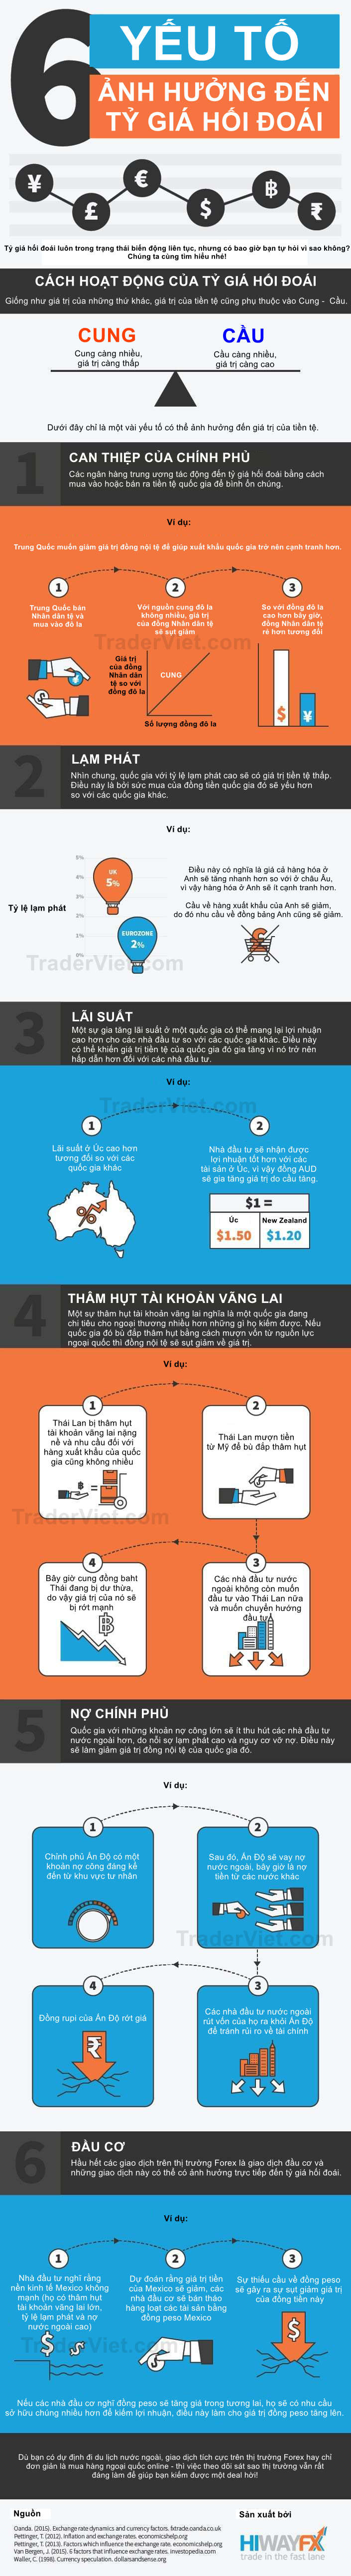 Infographic-6-yeu-to-anh-huong-den-ty-gia-hoi-doai-TraderViet1.jpg